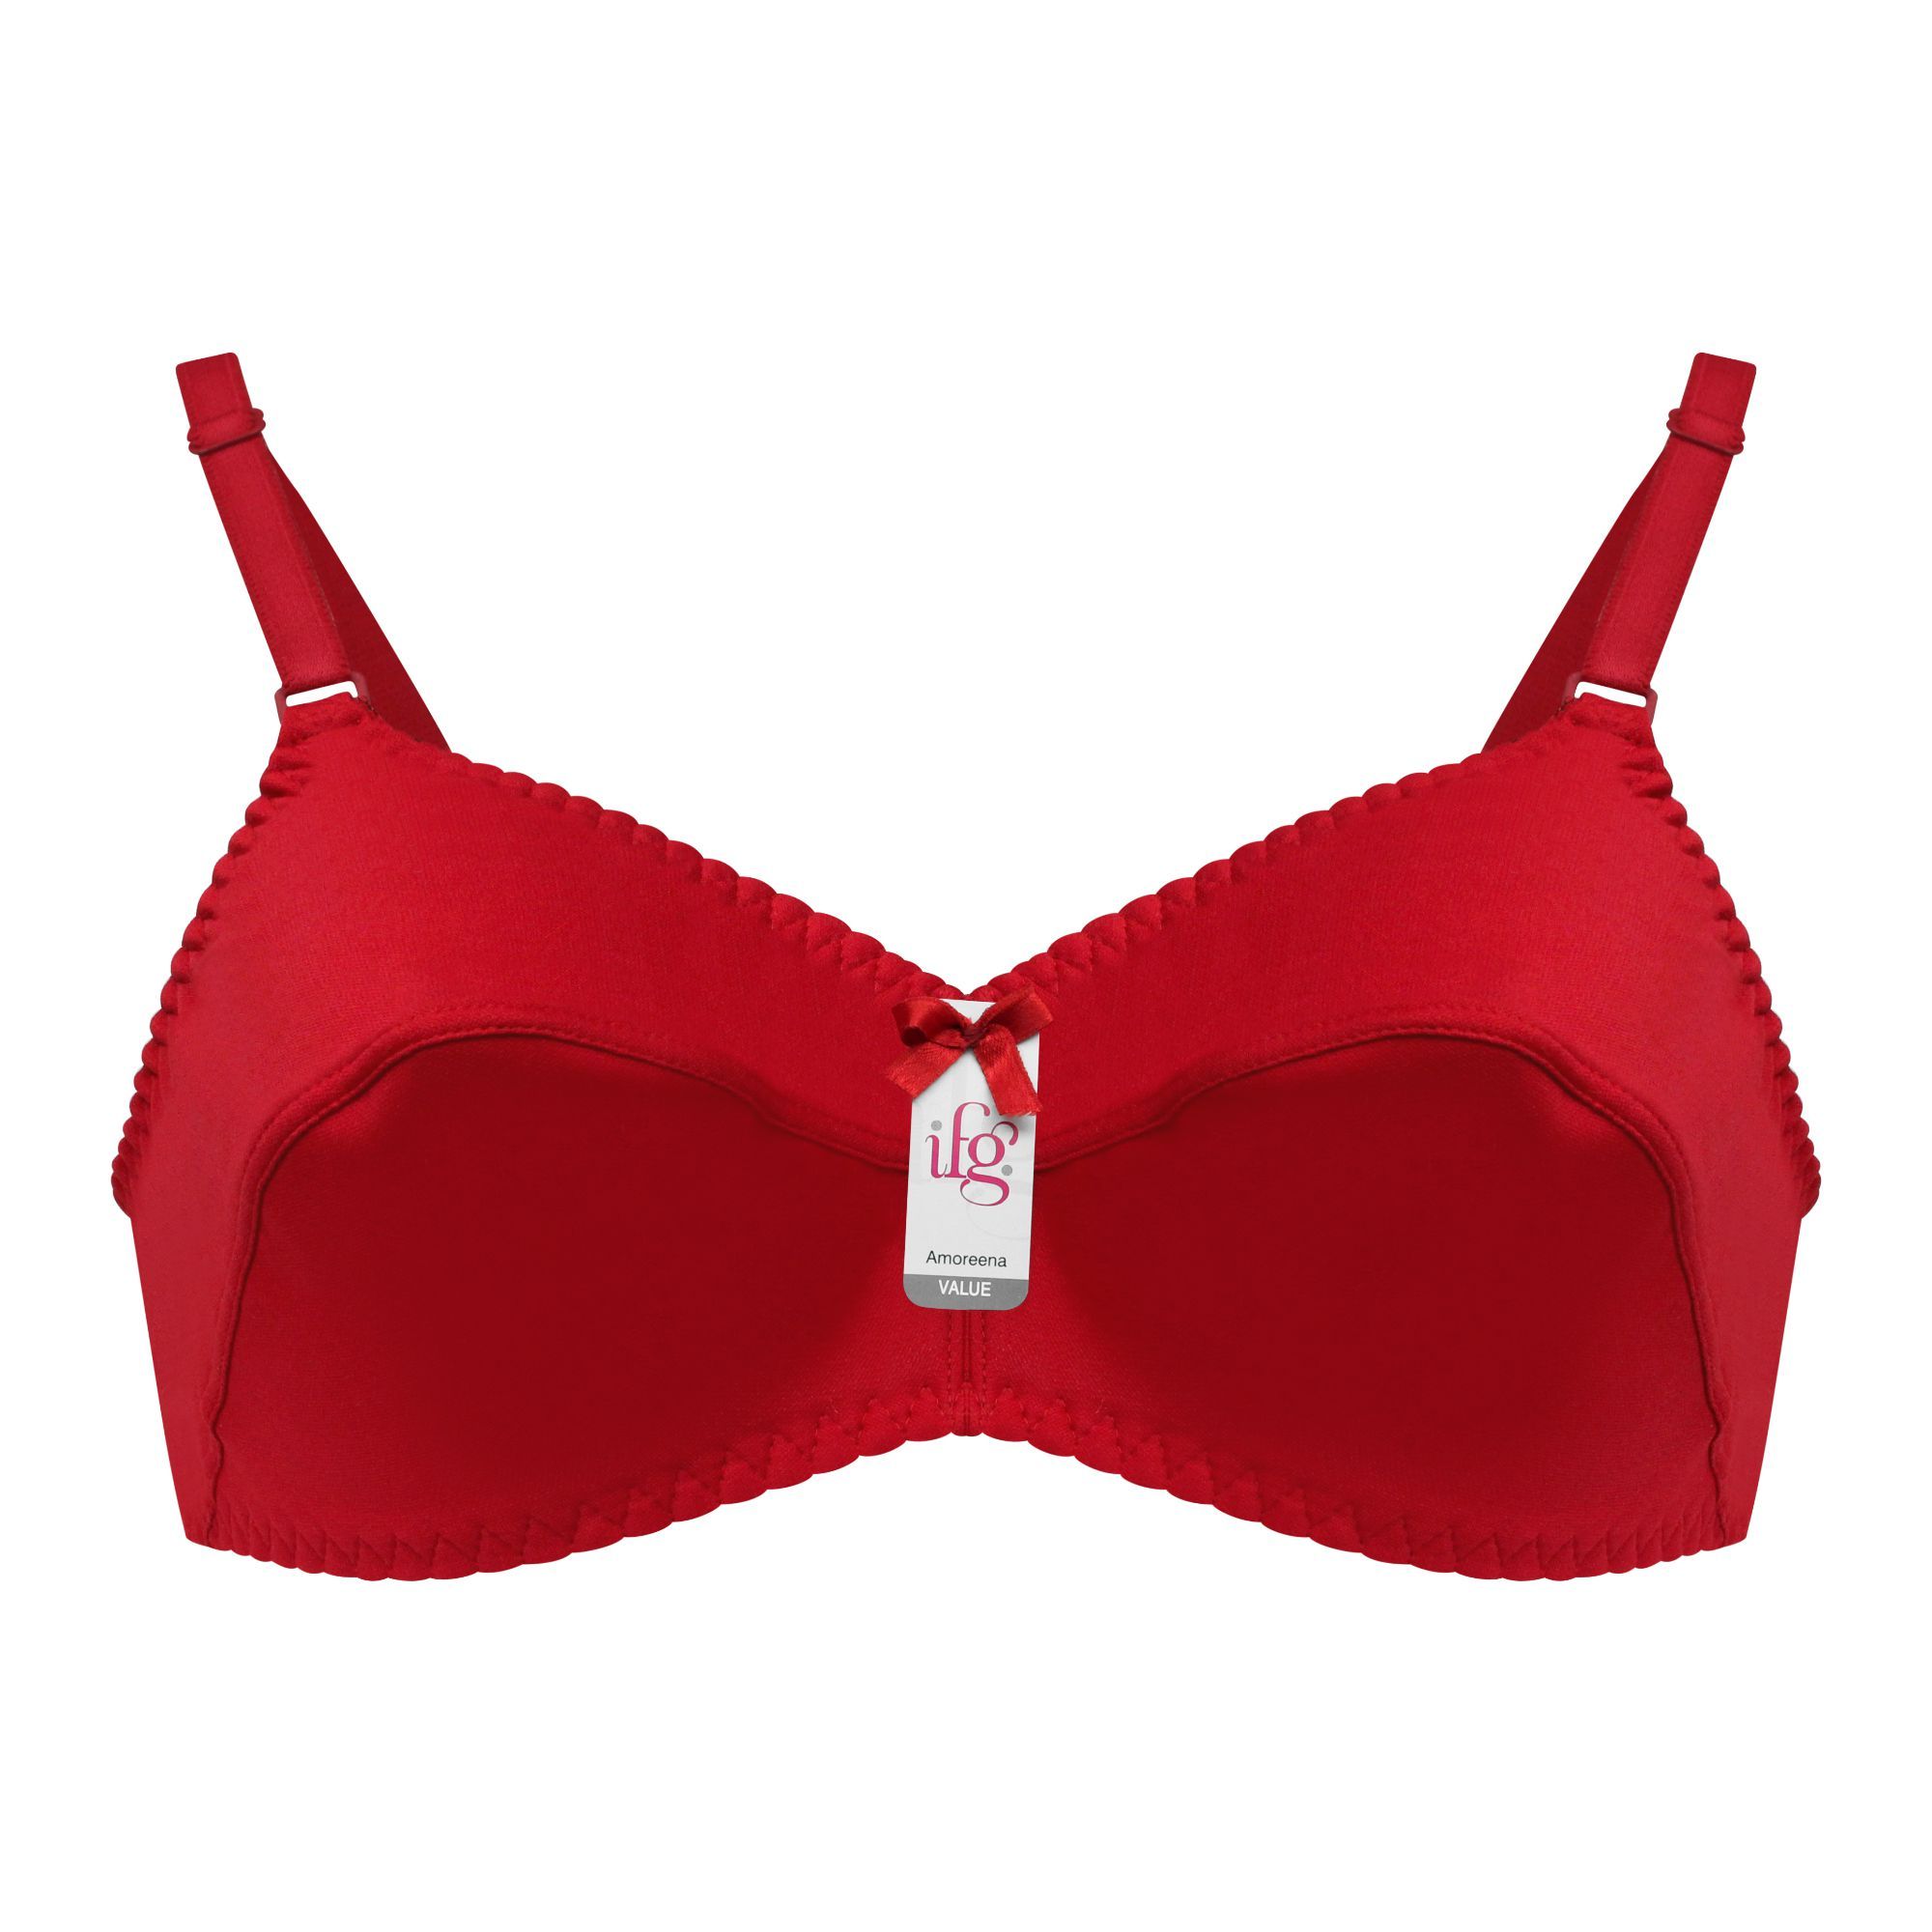 Purchase IFG Amoreena Bra, Maroon Online at Special Price in Pakistan 